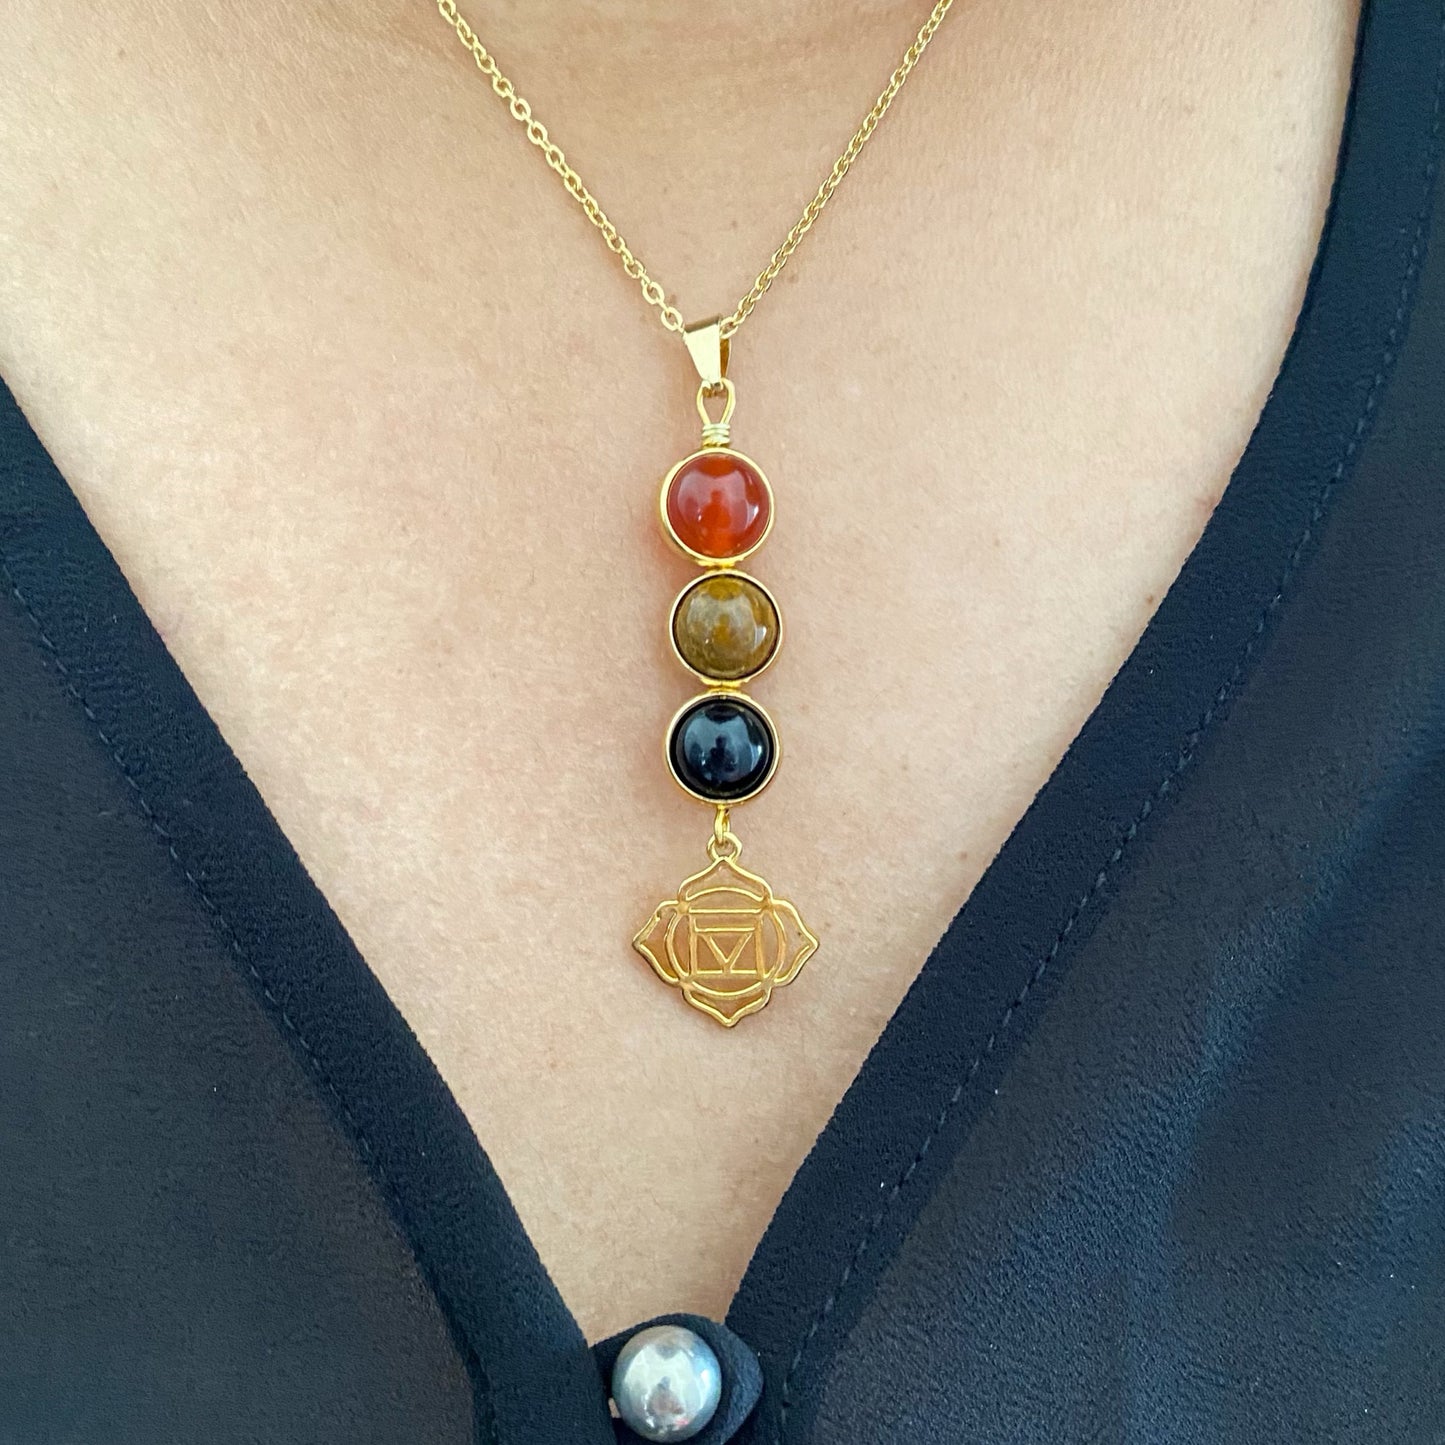 Root Chakra Healing Crystal Pendant Necklace